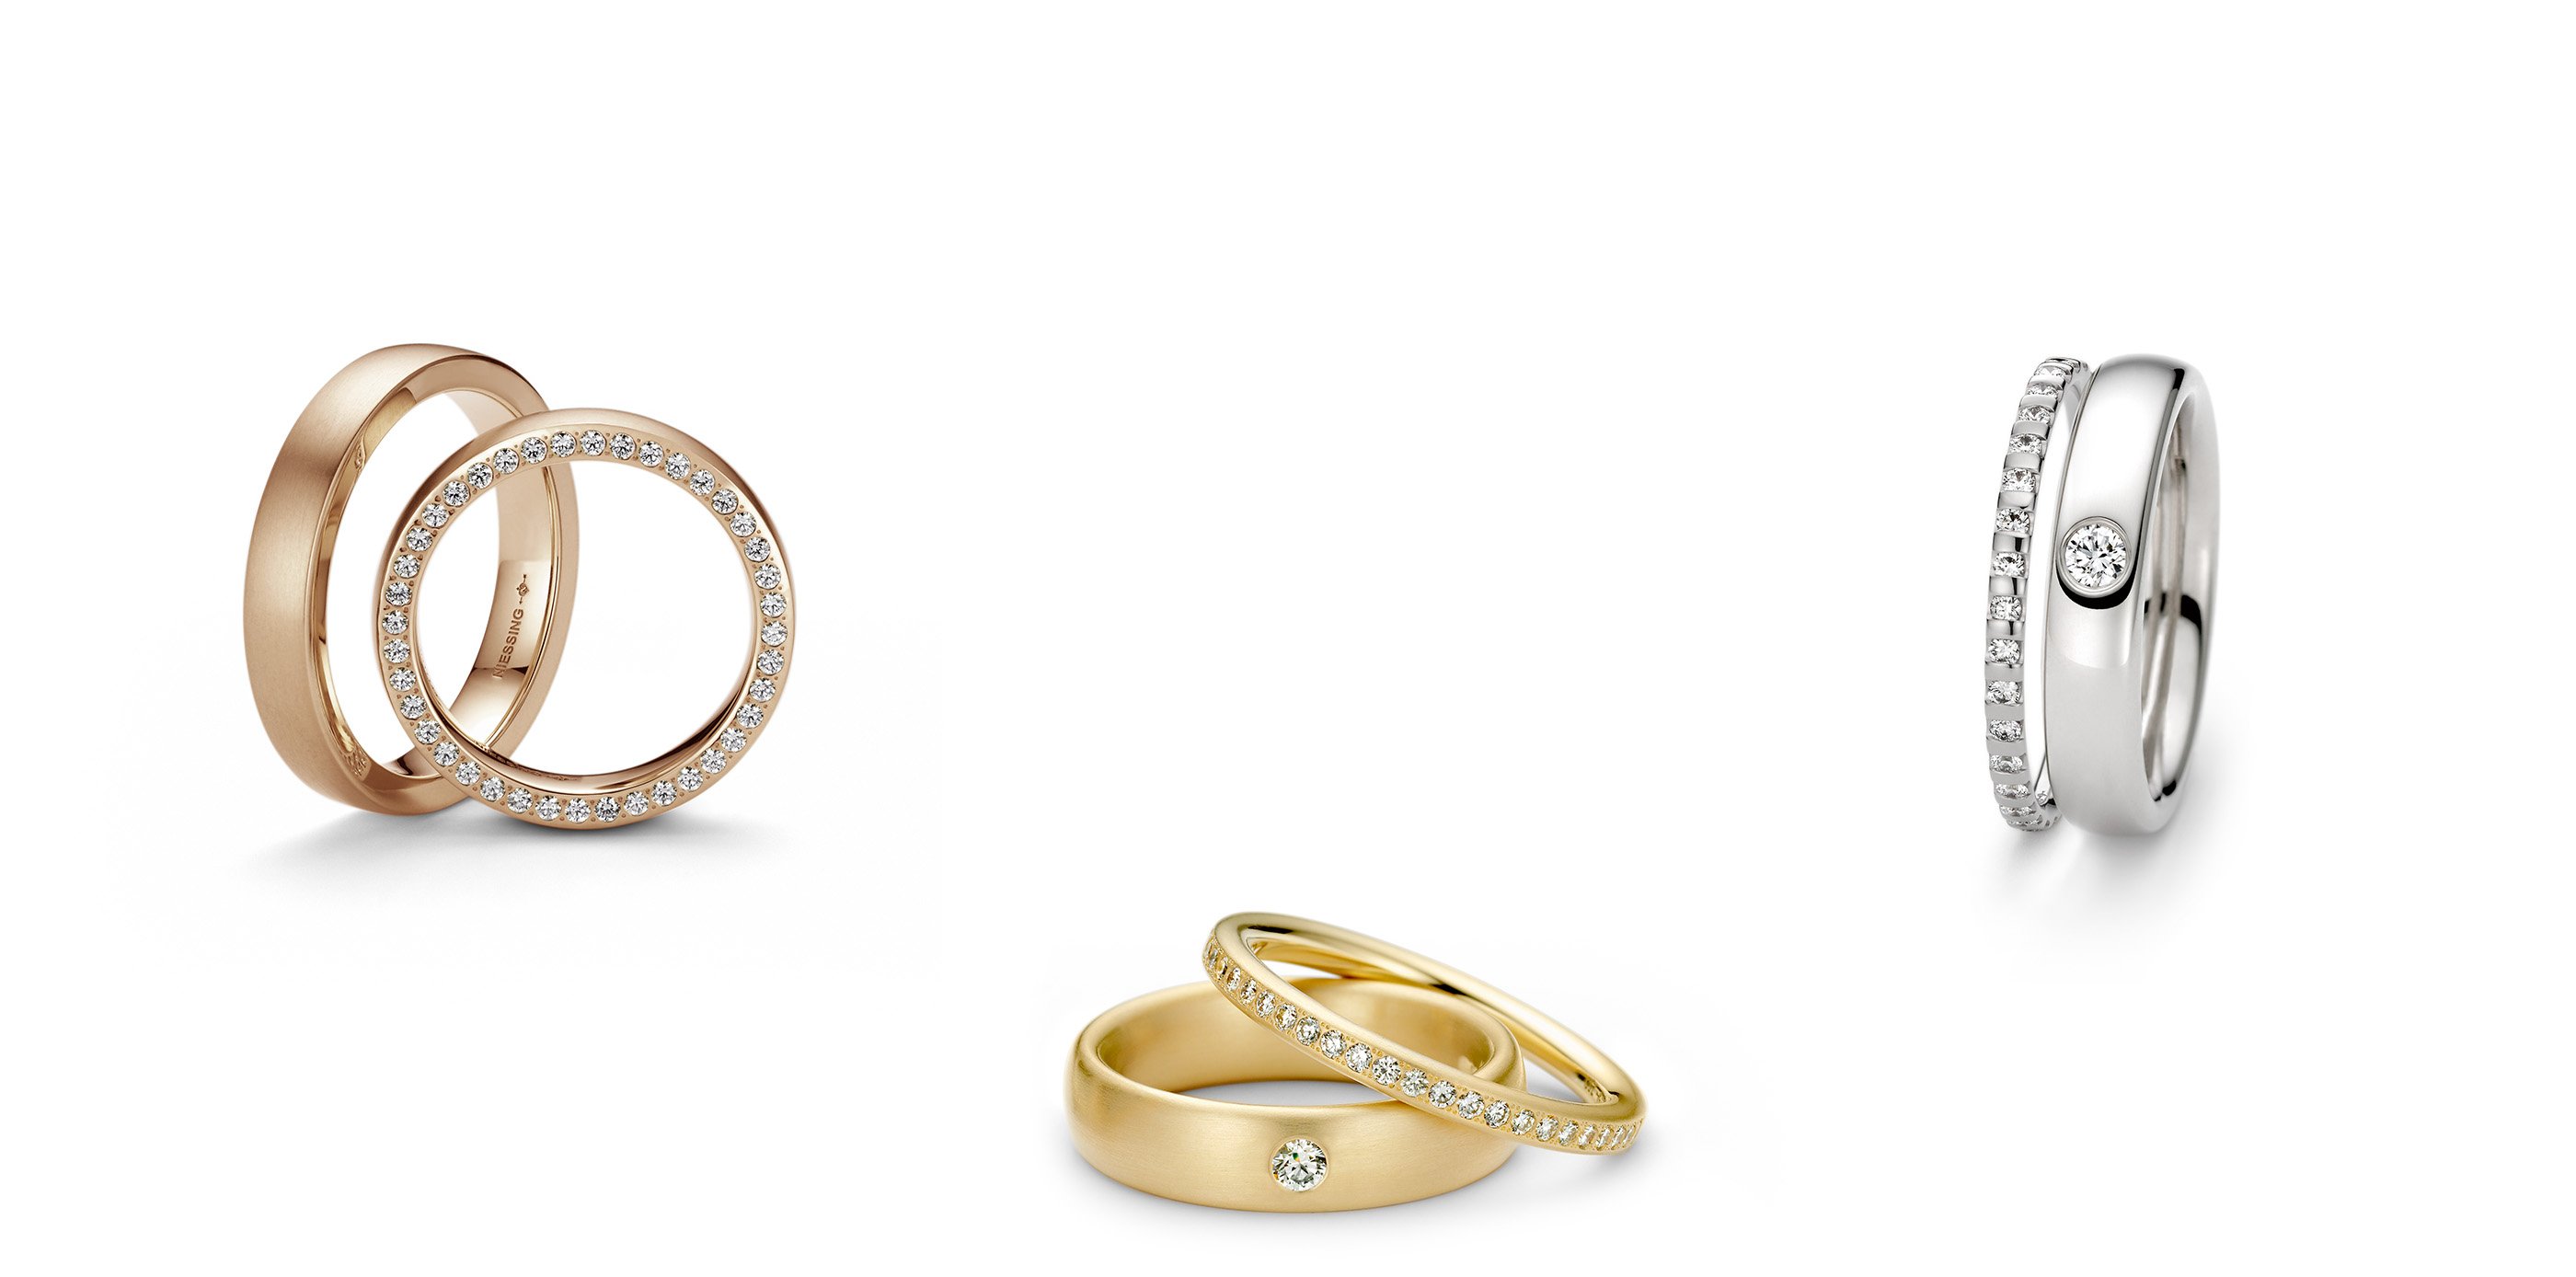 Wedding Rings - Perfect symbol of your love